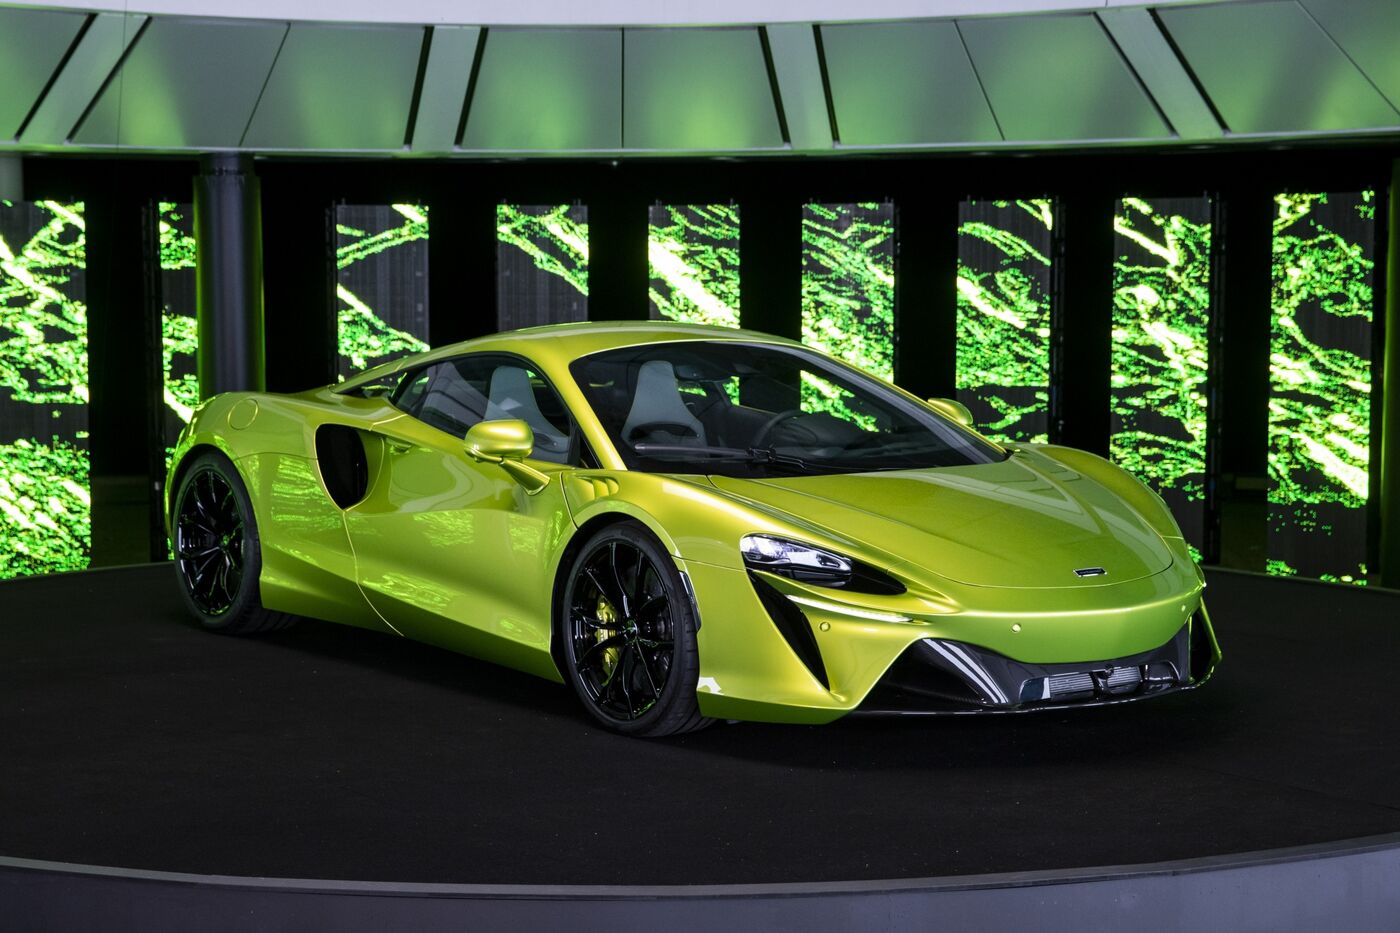 McLaren’s $258,000 Hybrid Boasts Blazing Speed Without the Guilt